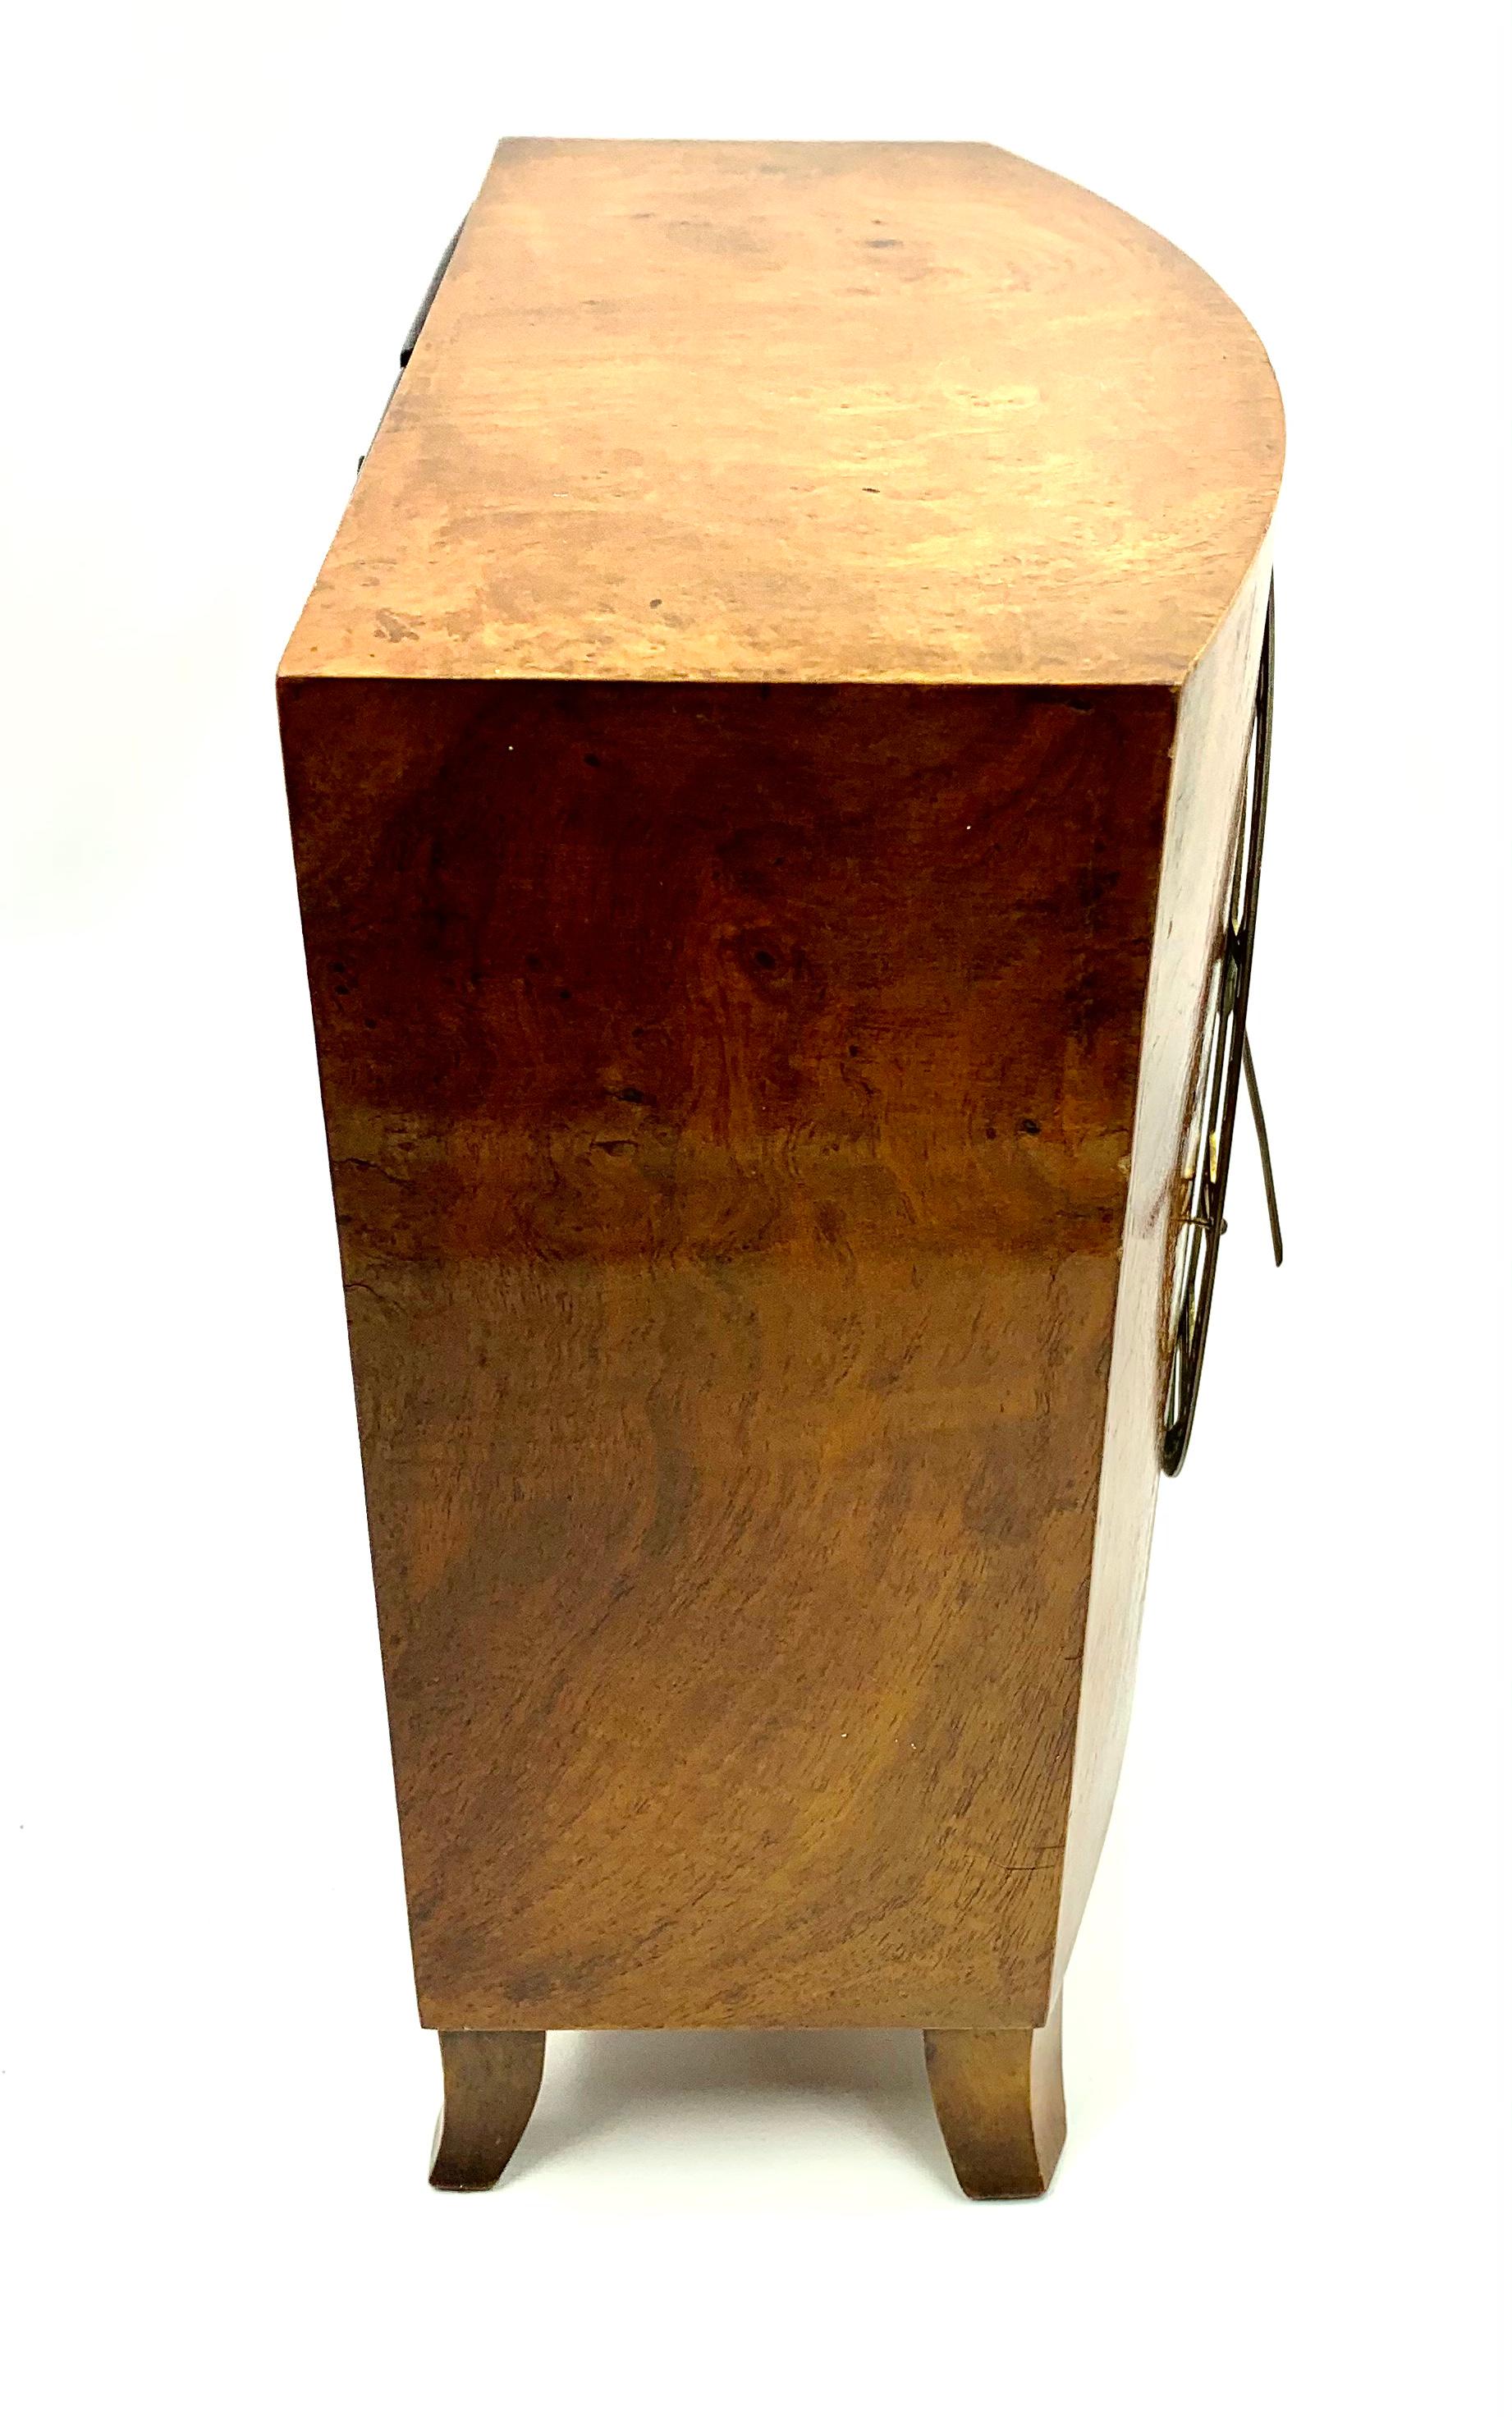 German Art Deco Burl Walnut Lenzkirch AUG 2 Million Clock, 1930's In Good Condition For Sale In New York, NY